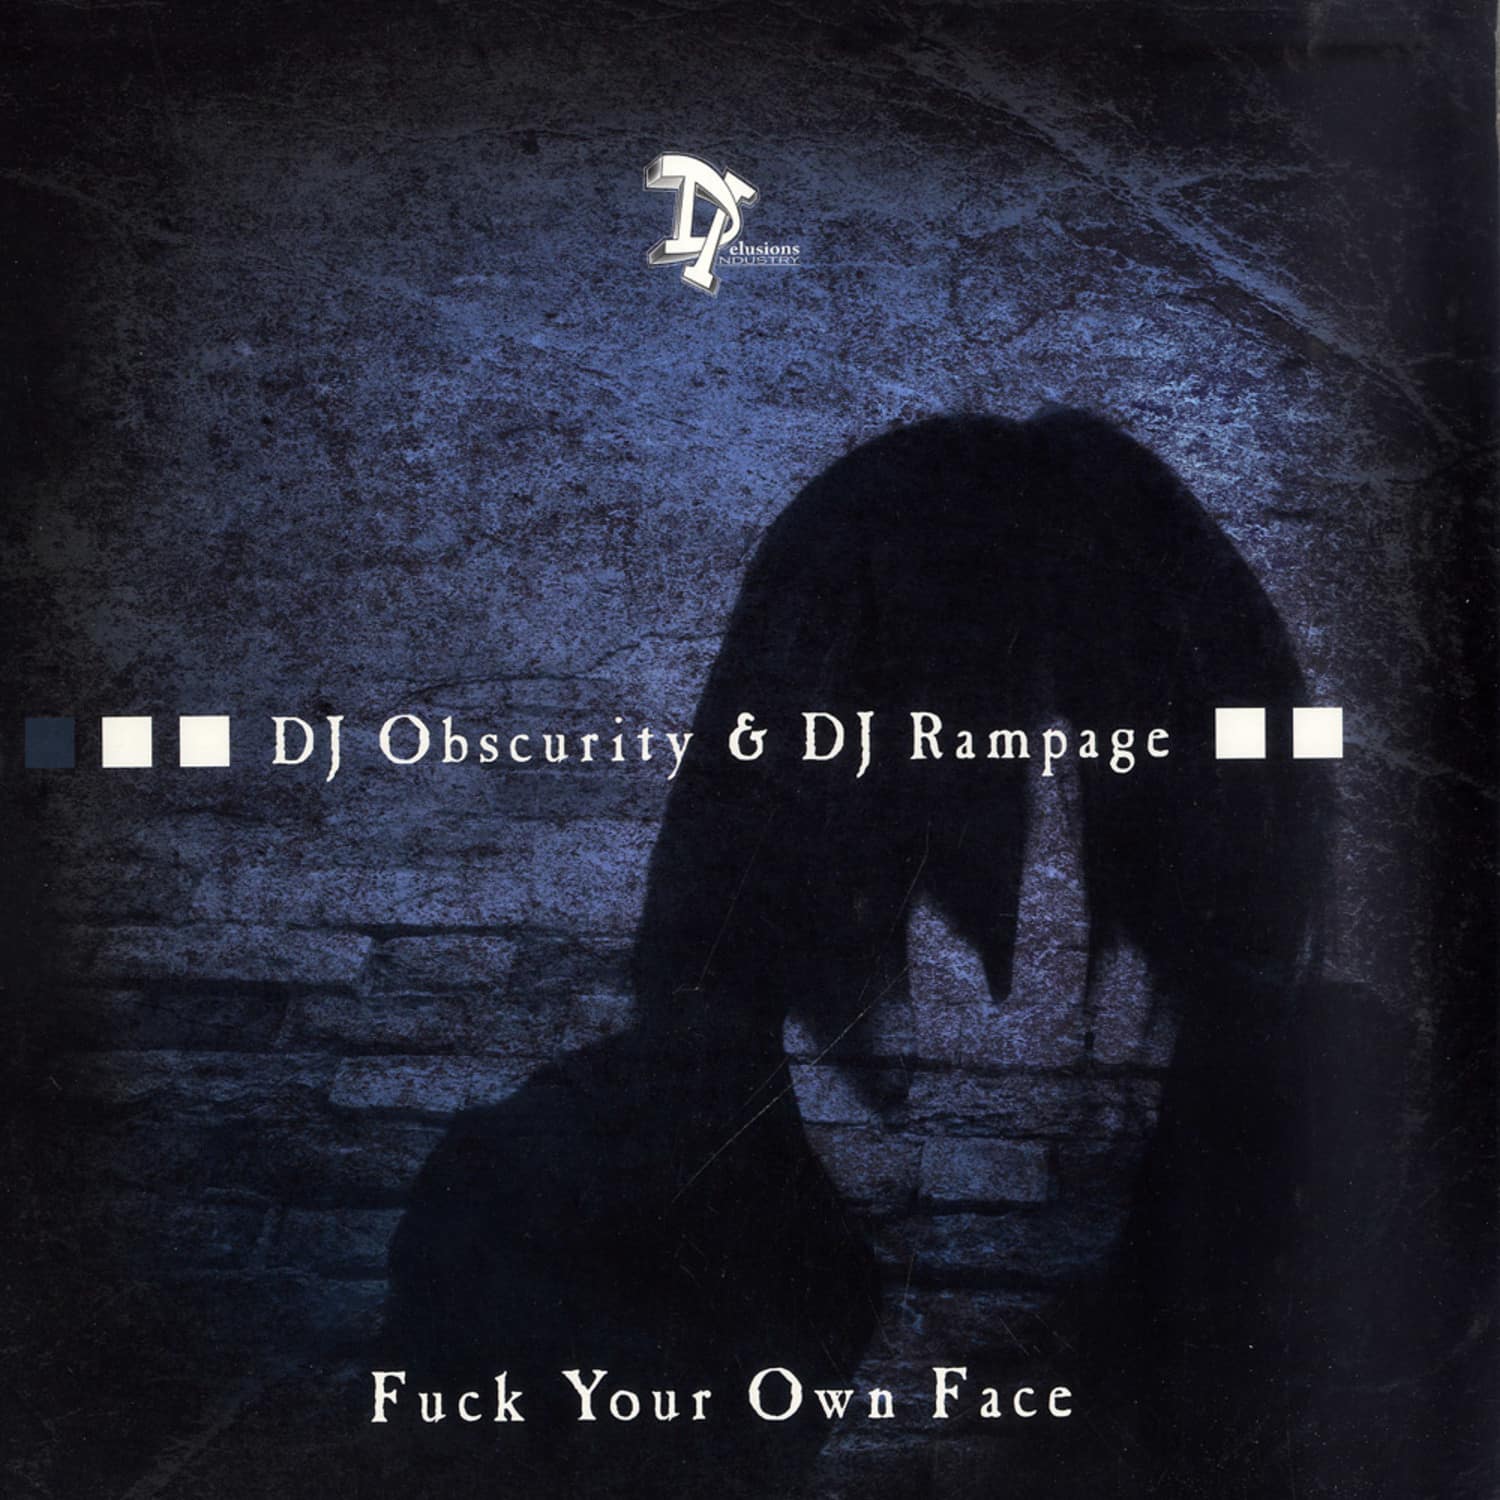 Dj Obscurity & Dj Rampage - FUCK YOUR OWN FACE